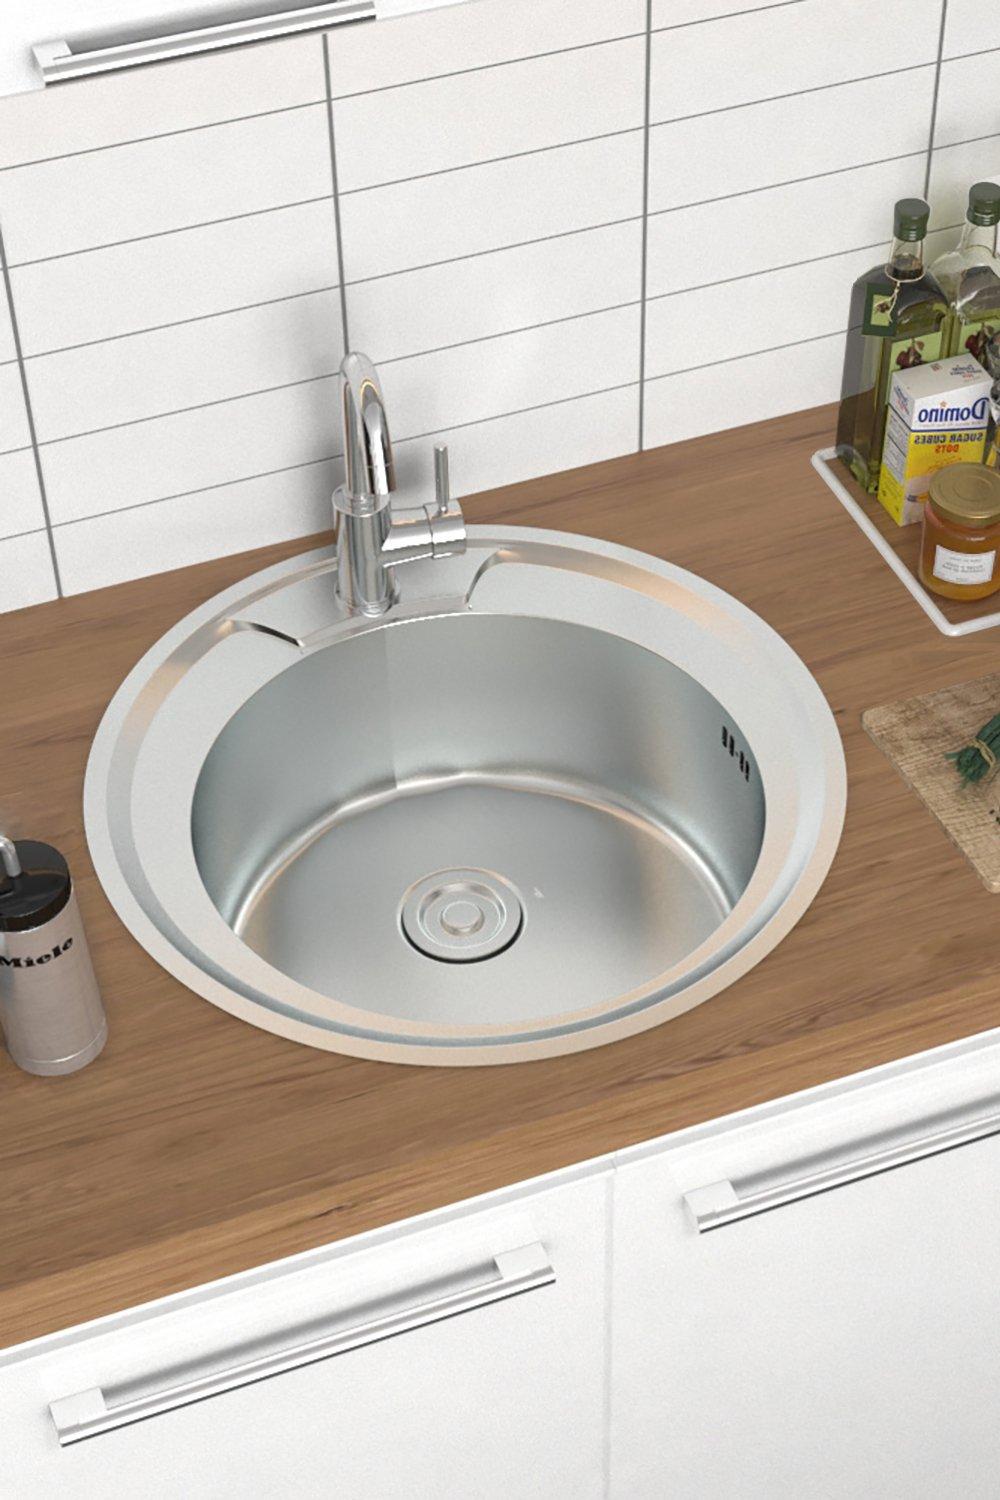 Top Mounted Stainless Steel Kitchen Sink Single Bowl